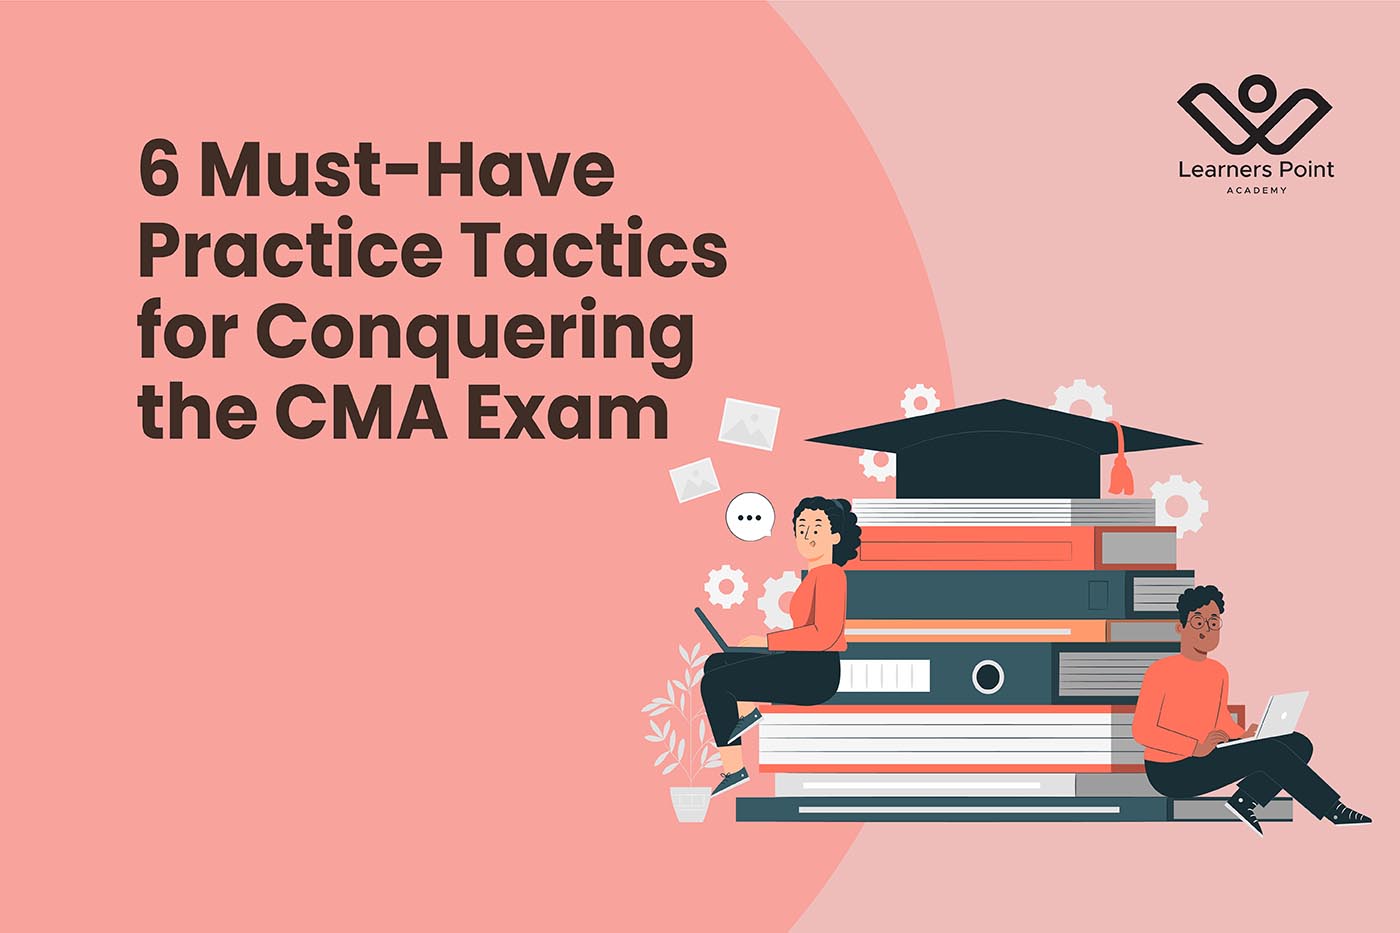 6 Must-Have Practice Tactics for Conquering the CMA Exam